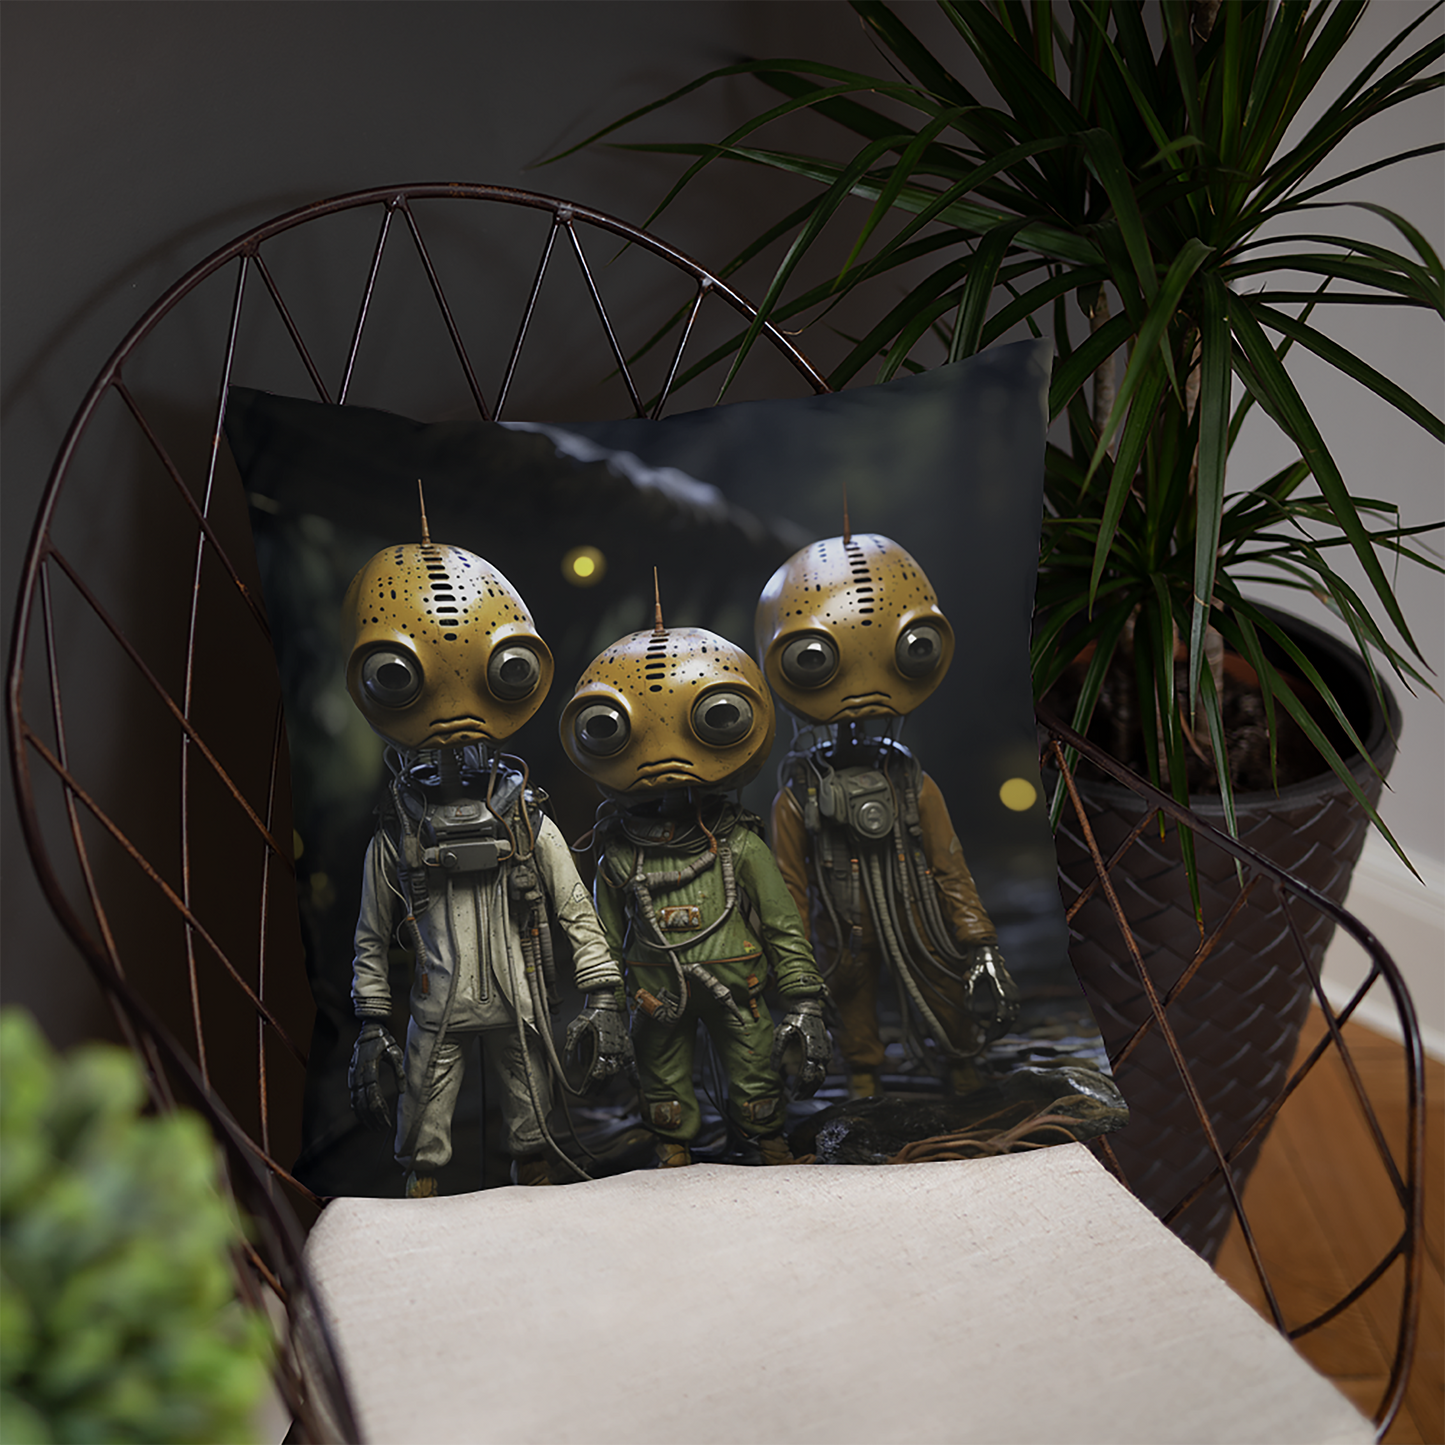 Space Throw Pillow Adorable Aliens in Industrial World Polyester Decorative Cushion 18x18